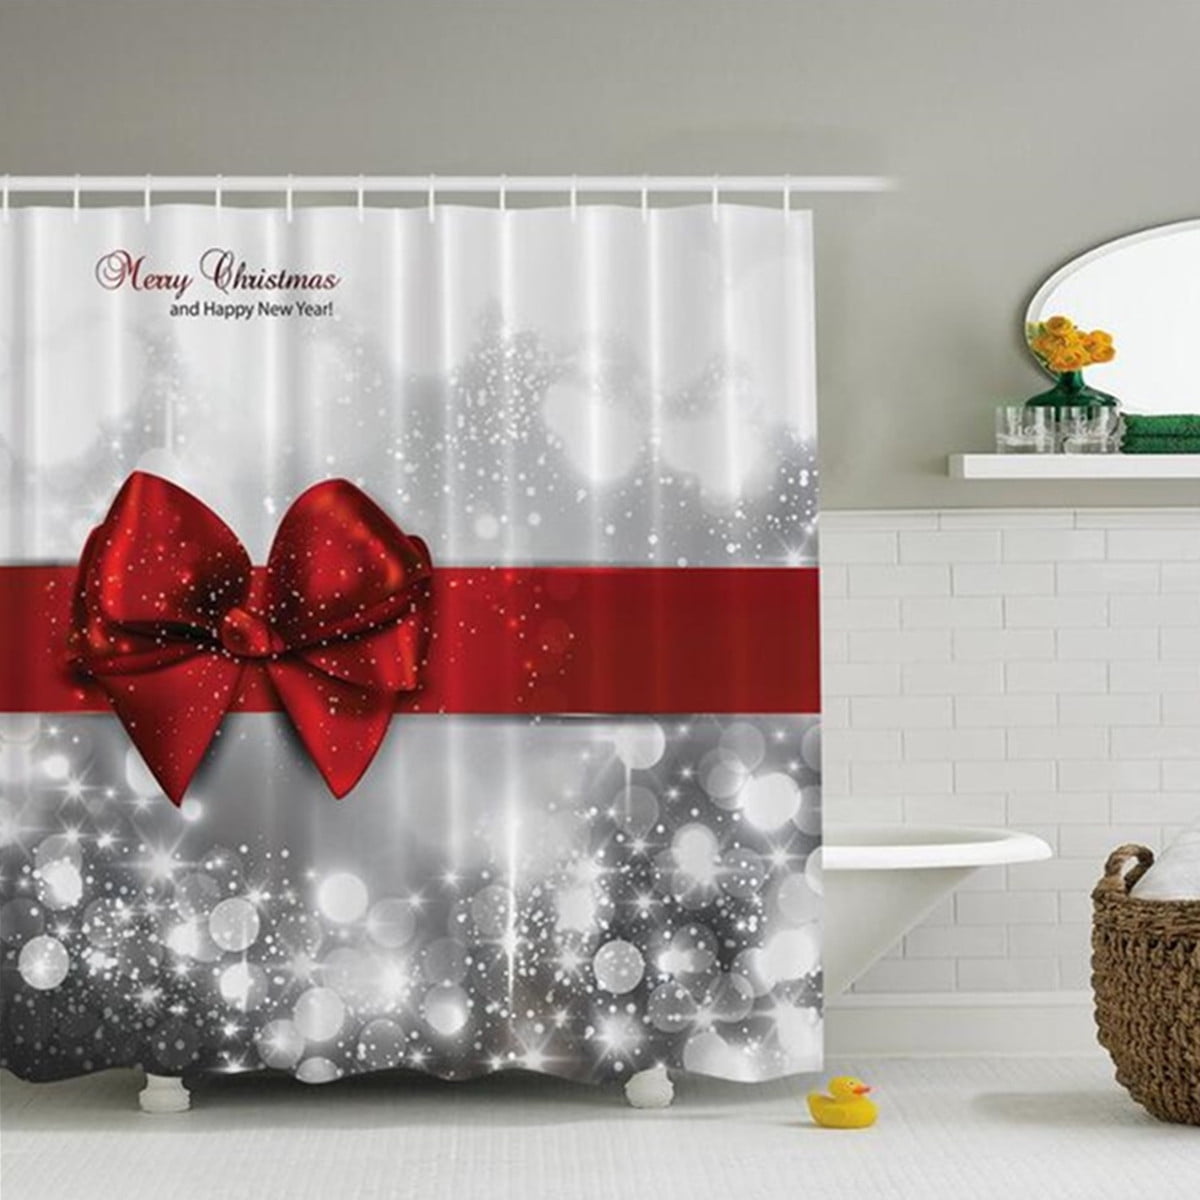 3 Type Christmas Silver Red Bow Knot Merry Christmas Bathroom OR Toilet Cover Mat 180x180cm Shower Curtain With Hooks Christmas Gift